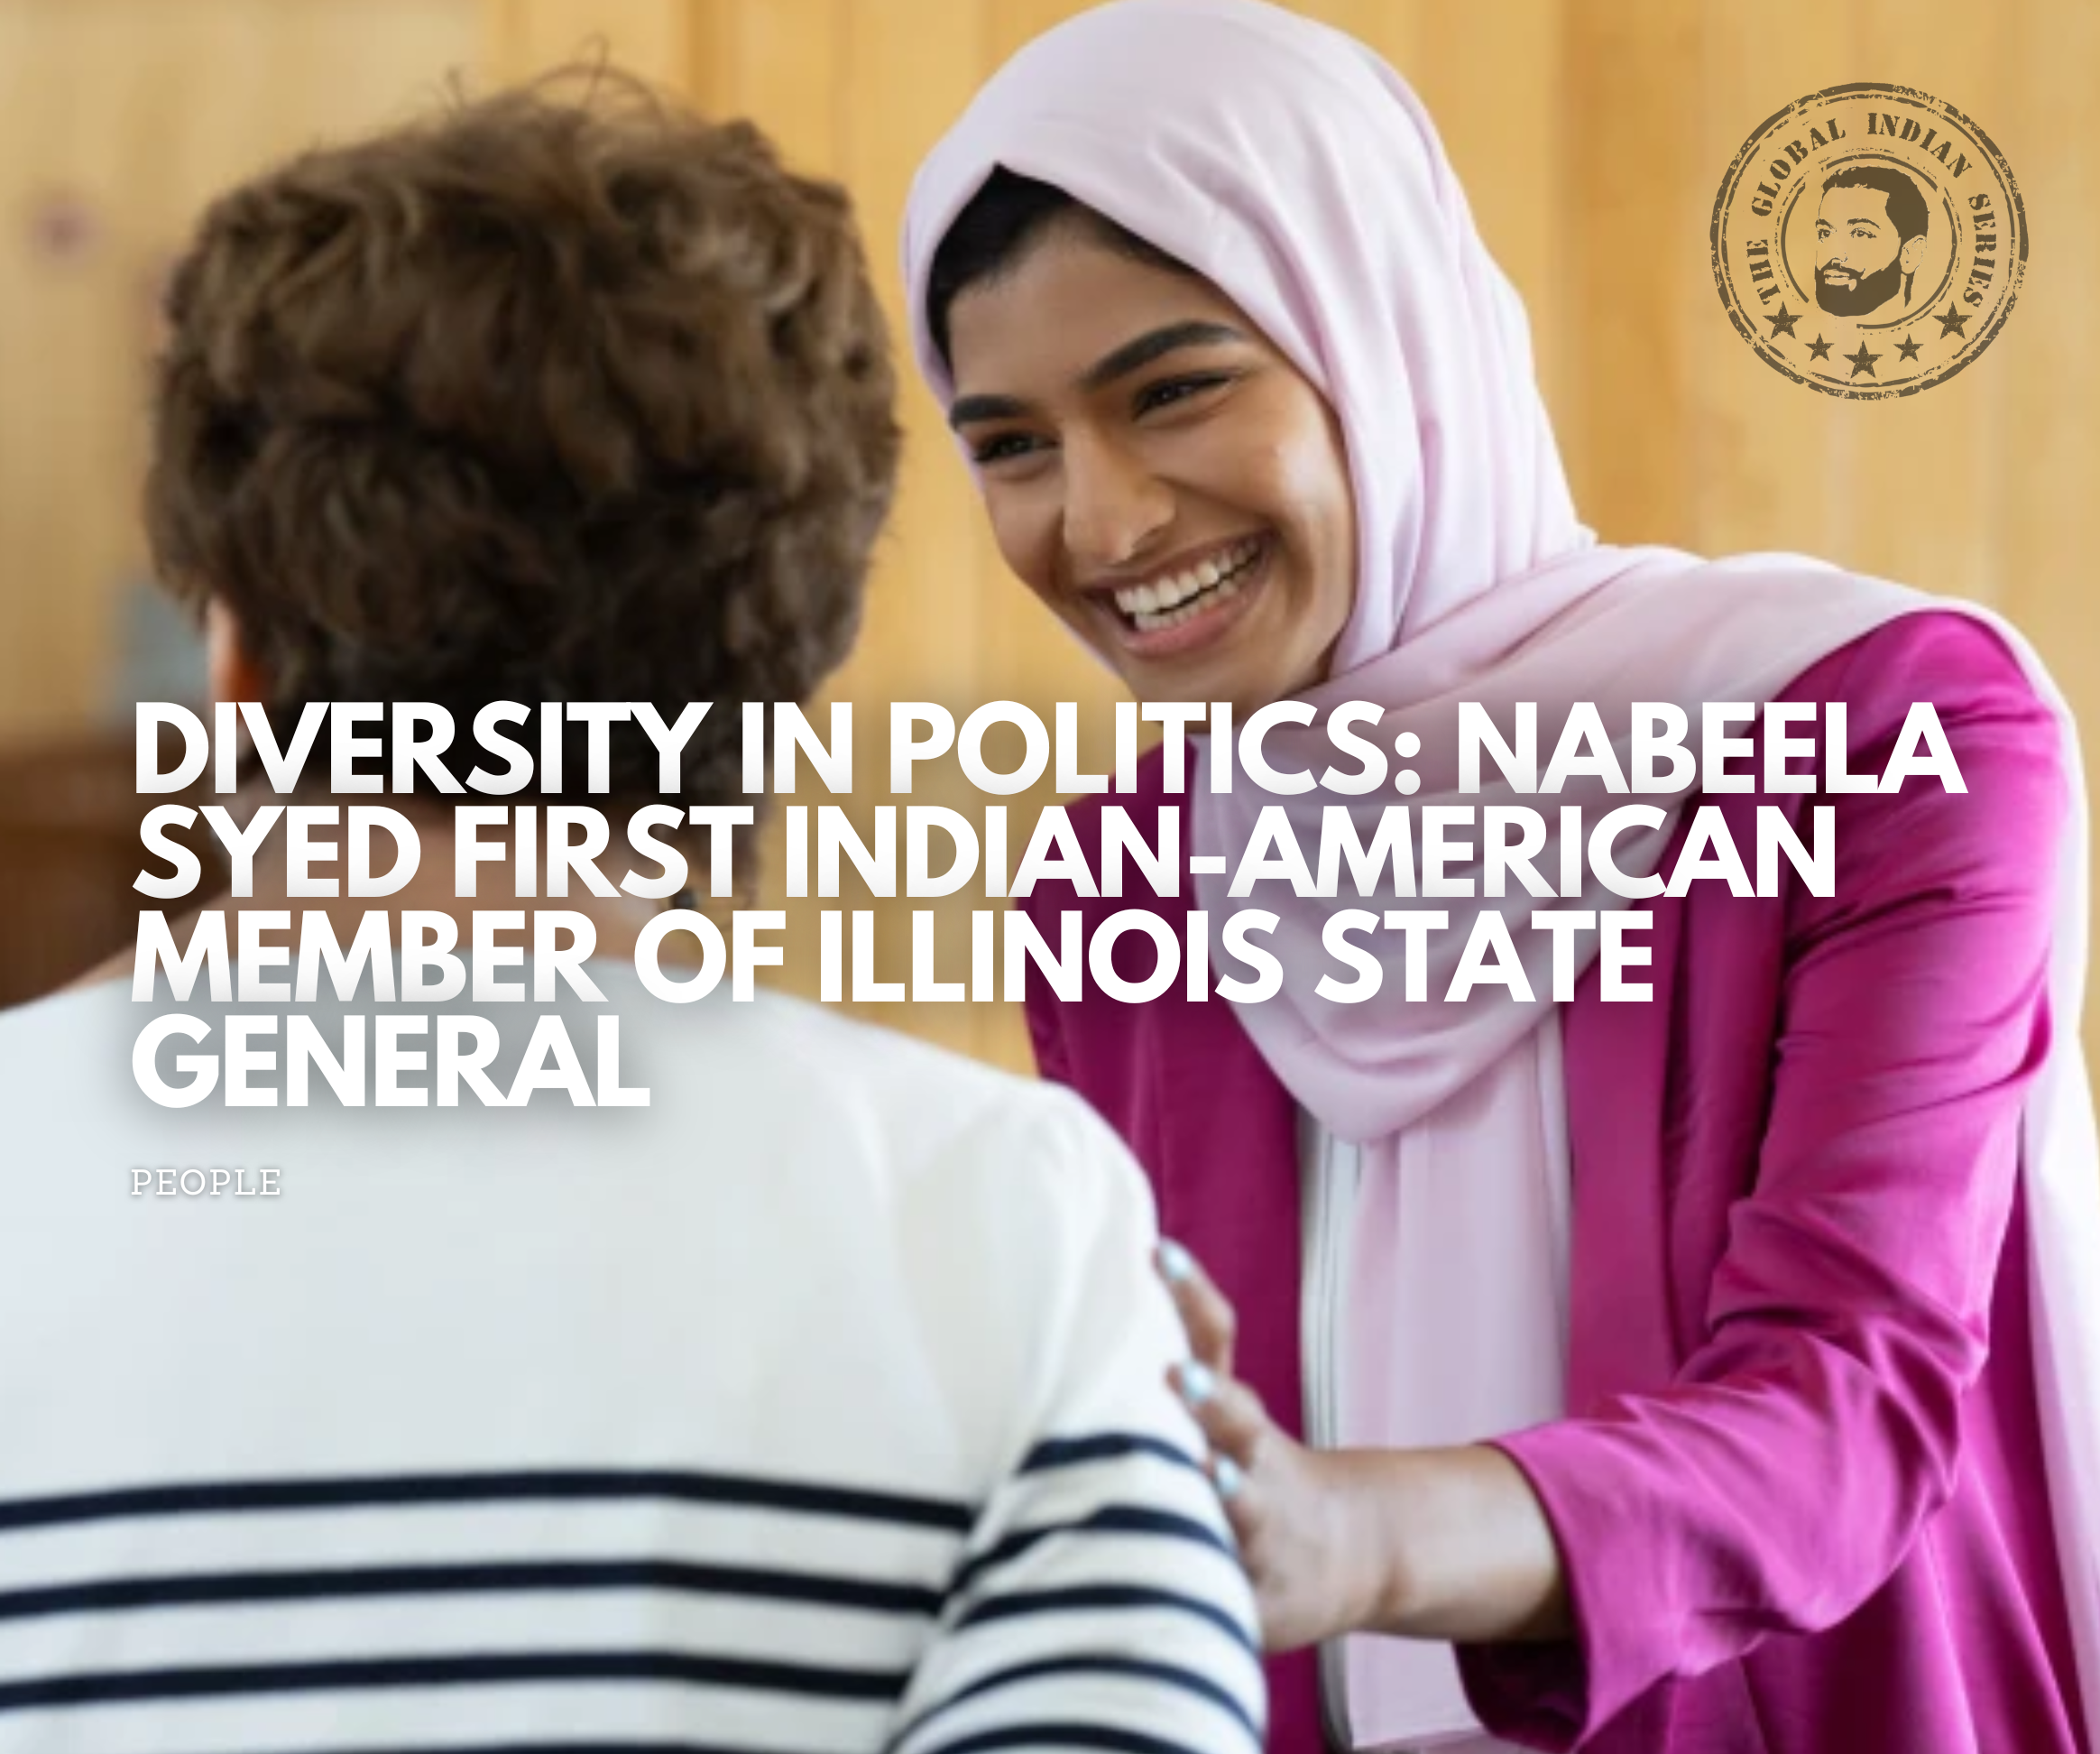 Nabeela Syed Makes History In US Midterm Elections, first to be Indian-American Member of Illinois State General.